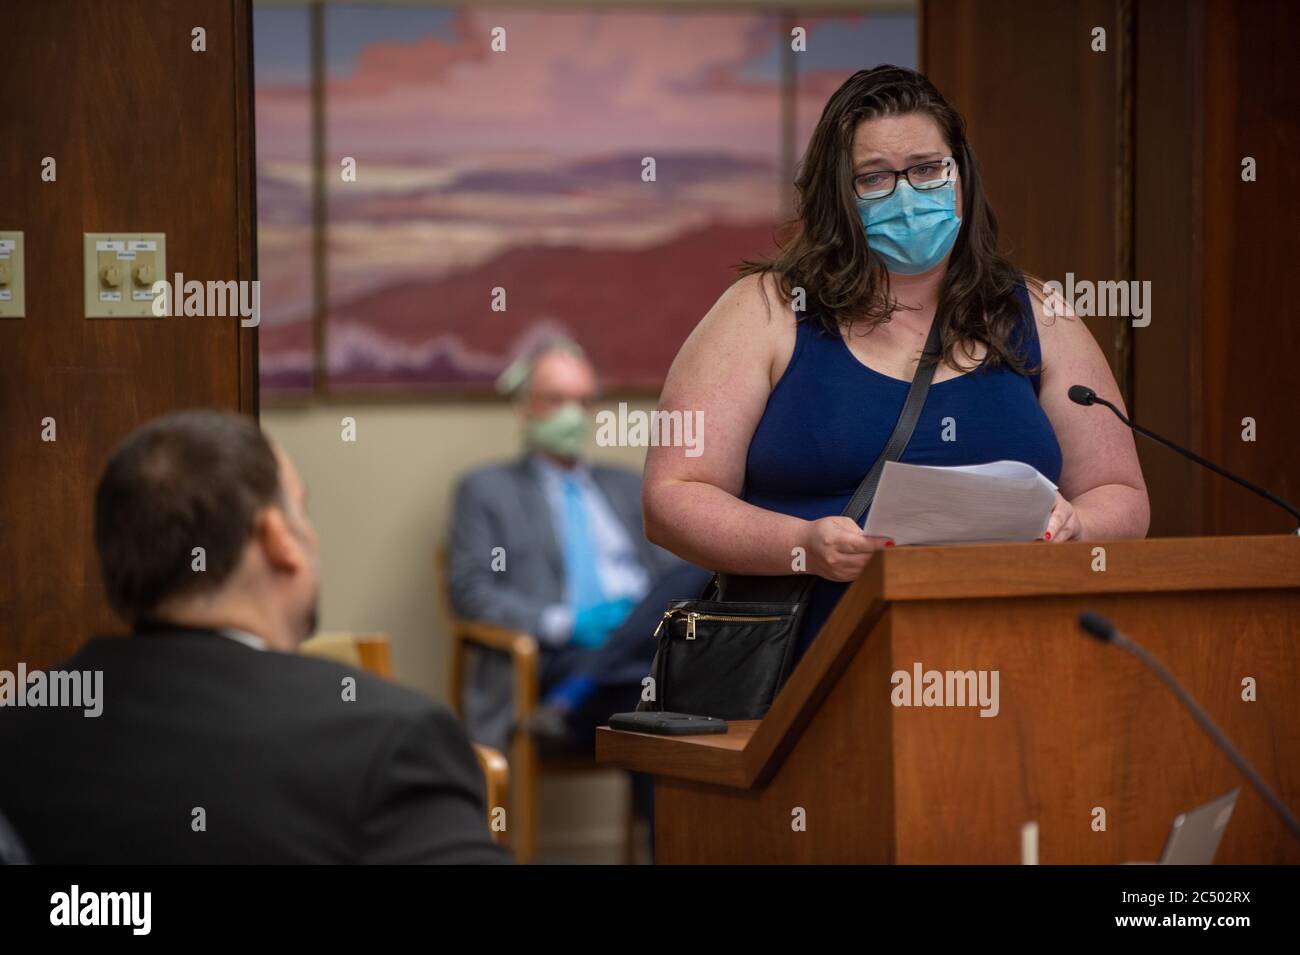 Manhattan, Kansas, USA. 29th June, 2020. KAYLEE PROCTOR, right, speaks to the Riley County Commission on Monday. PROCTOR, and other community members addressed the commission regarding community masking and racial tensions within the county. Credit: Luke Townsend/ZUMA Wire/Alamy Live News Stock Photo